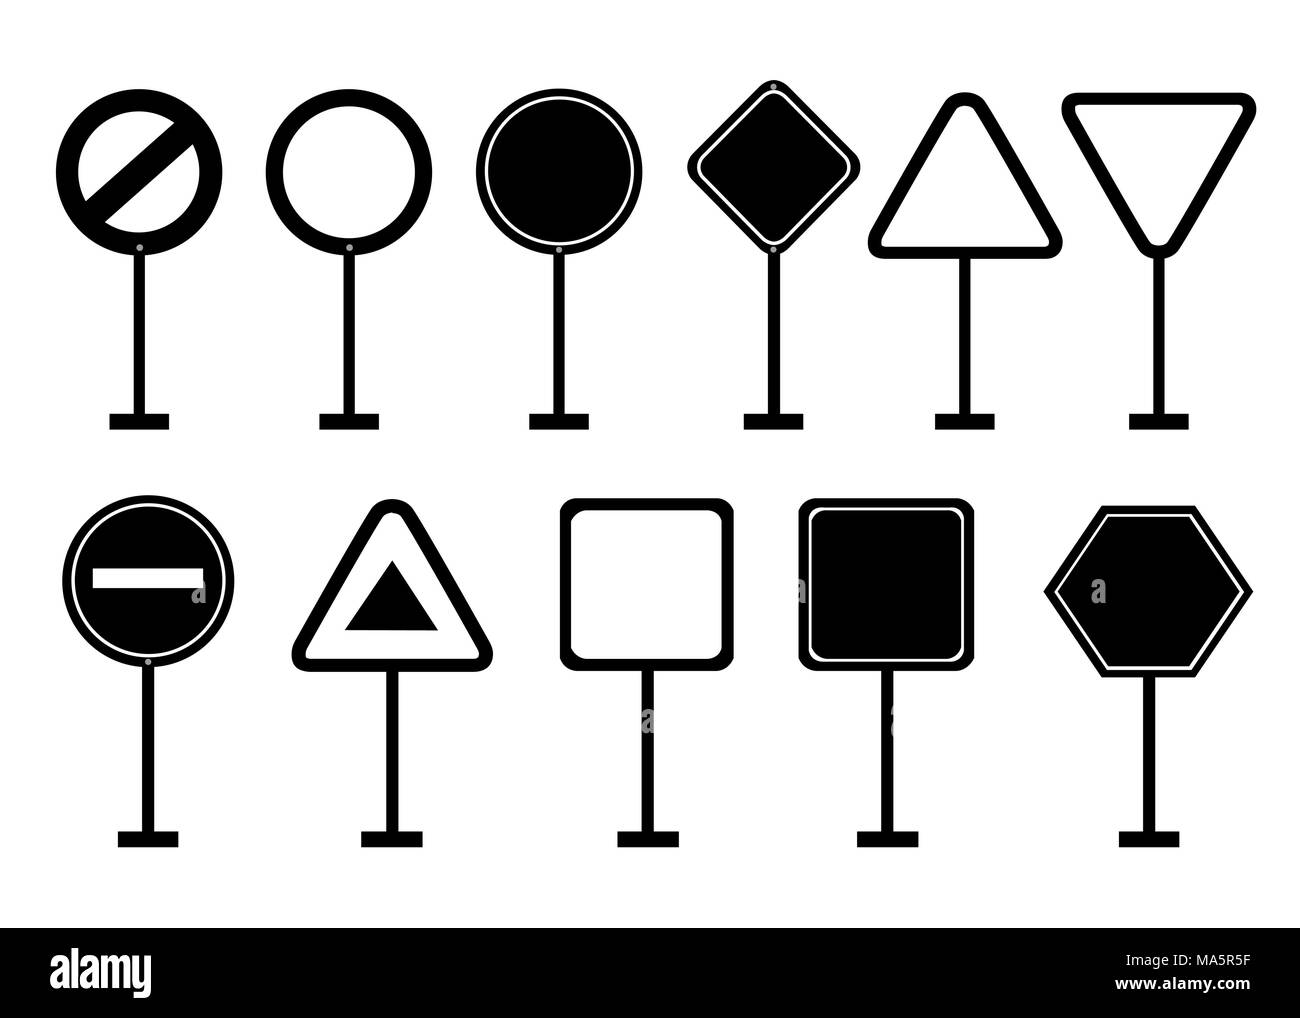 Black silhouettes. Set of road signs. Road signs with place for your symbols or picture. Vector illustration isolated on white background. Website pag Stock Vector